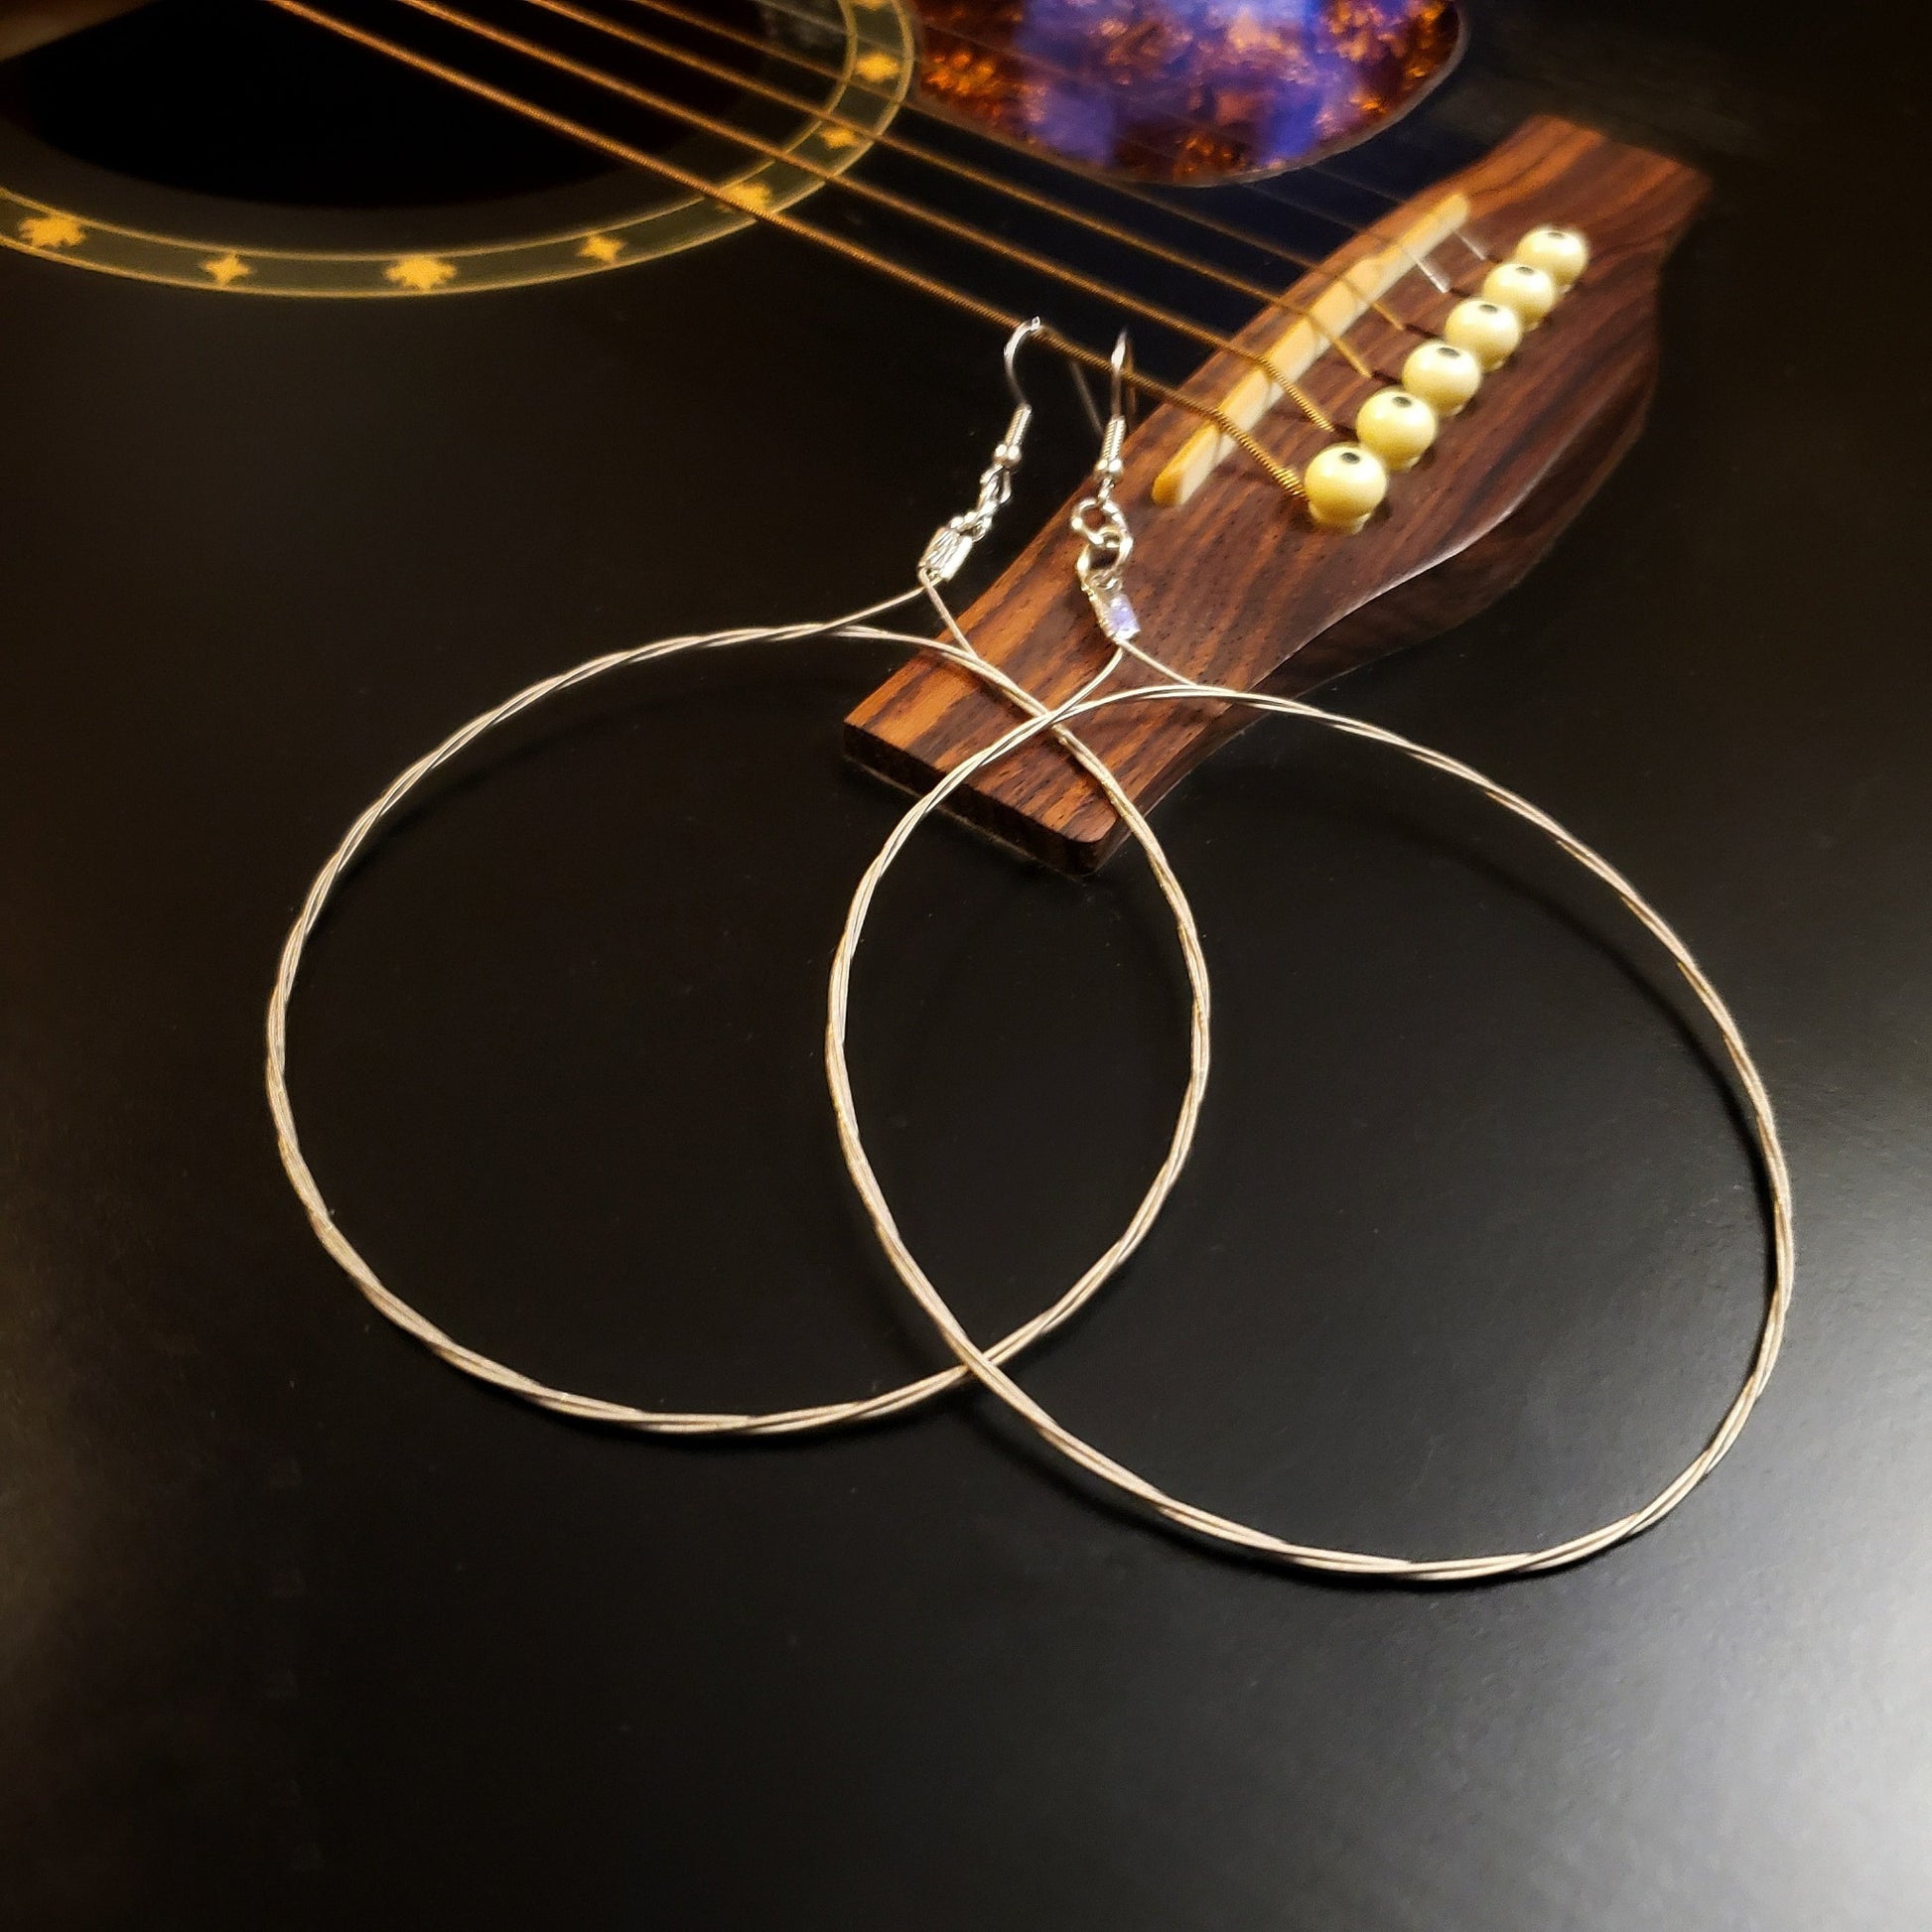 pair of large hoop style earrings made from upcycled guitar strings hooked onto a black guitar's E string